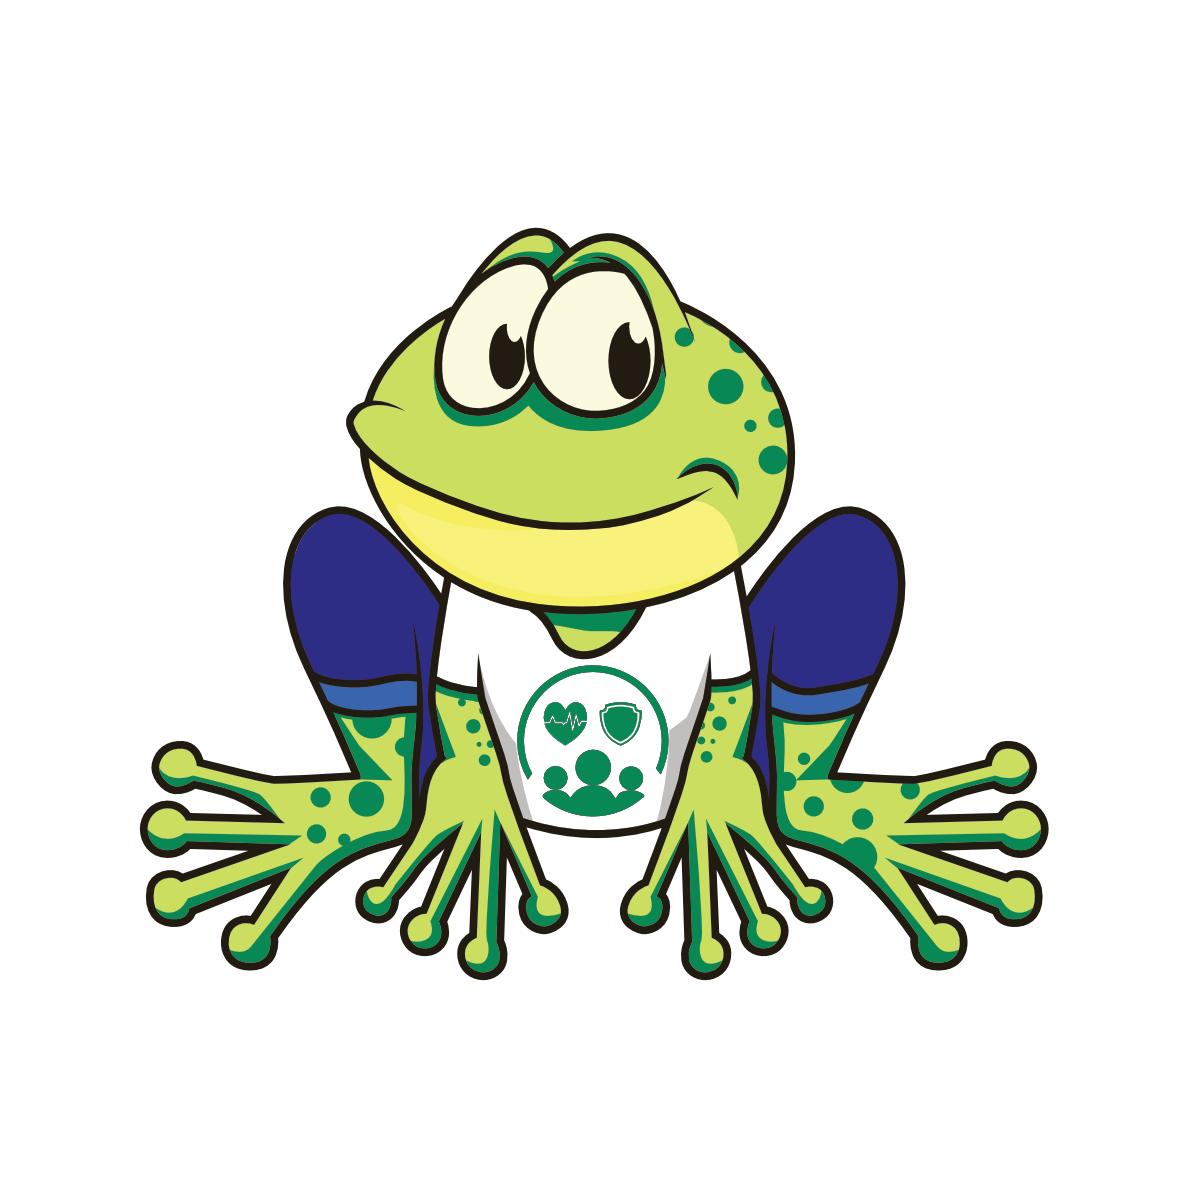 A green frog on a white background. The frog wears blue pants and a white tshirt with a logo. The logo shows a beating heart and a shield